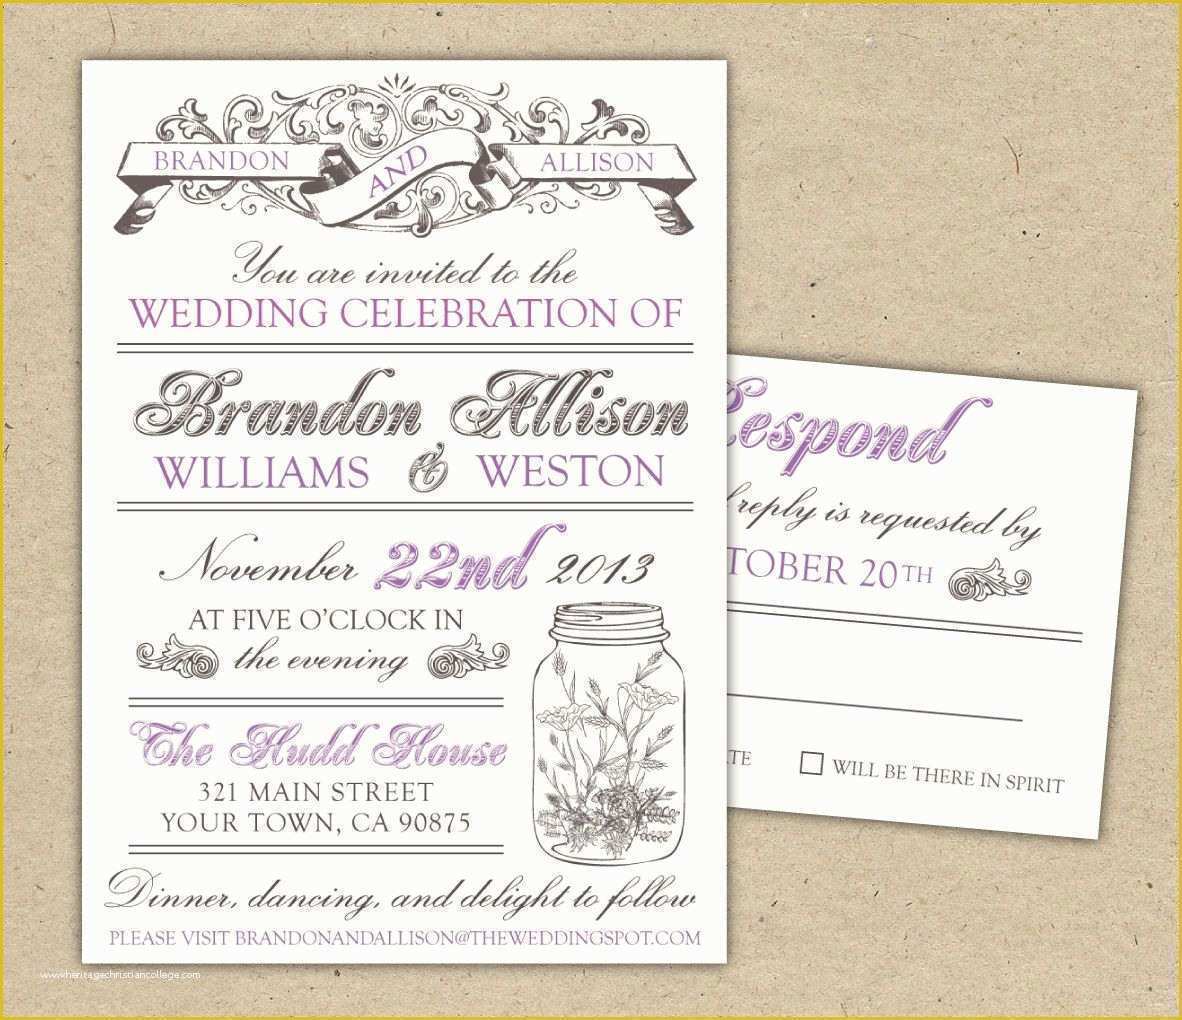 Free Wedding Announcement Templates Download Of Free Templates for Invitations